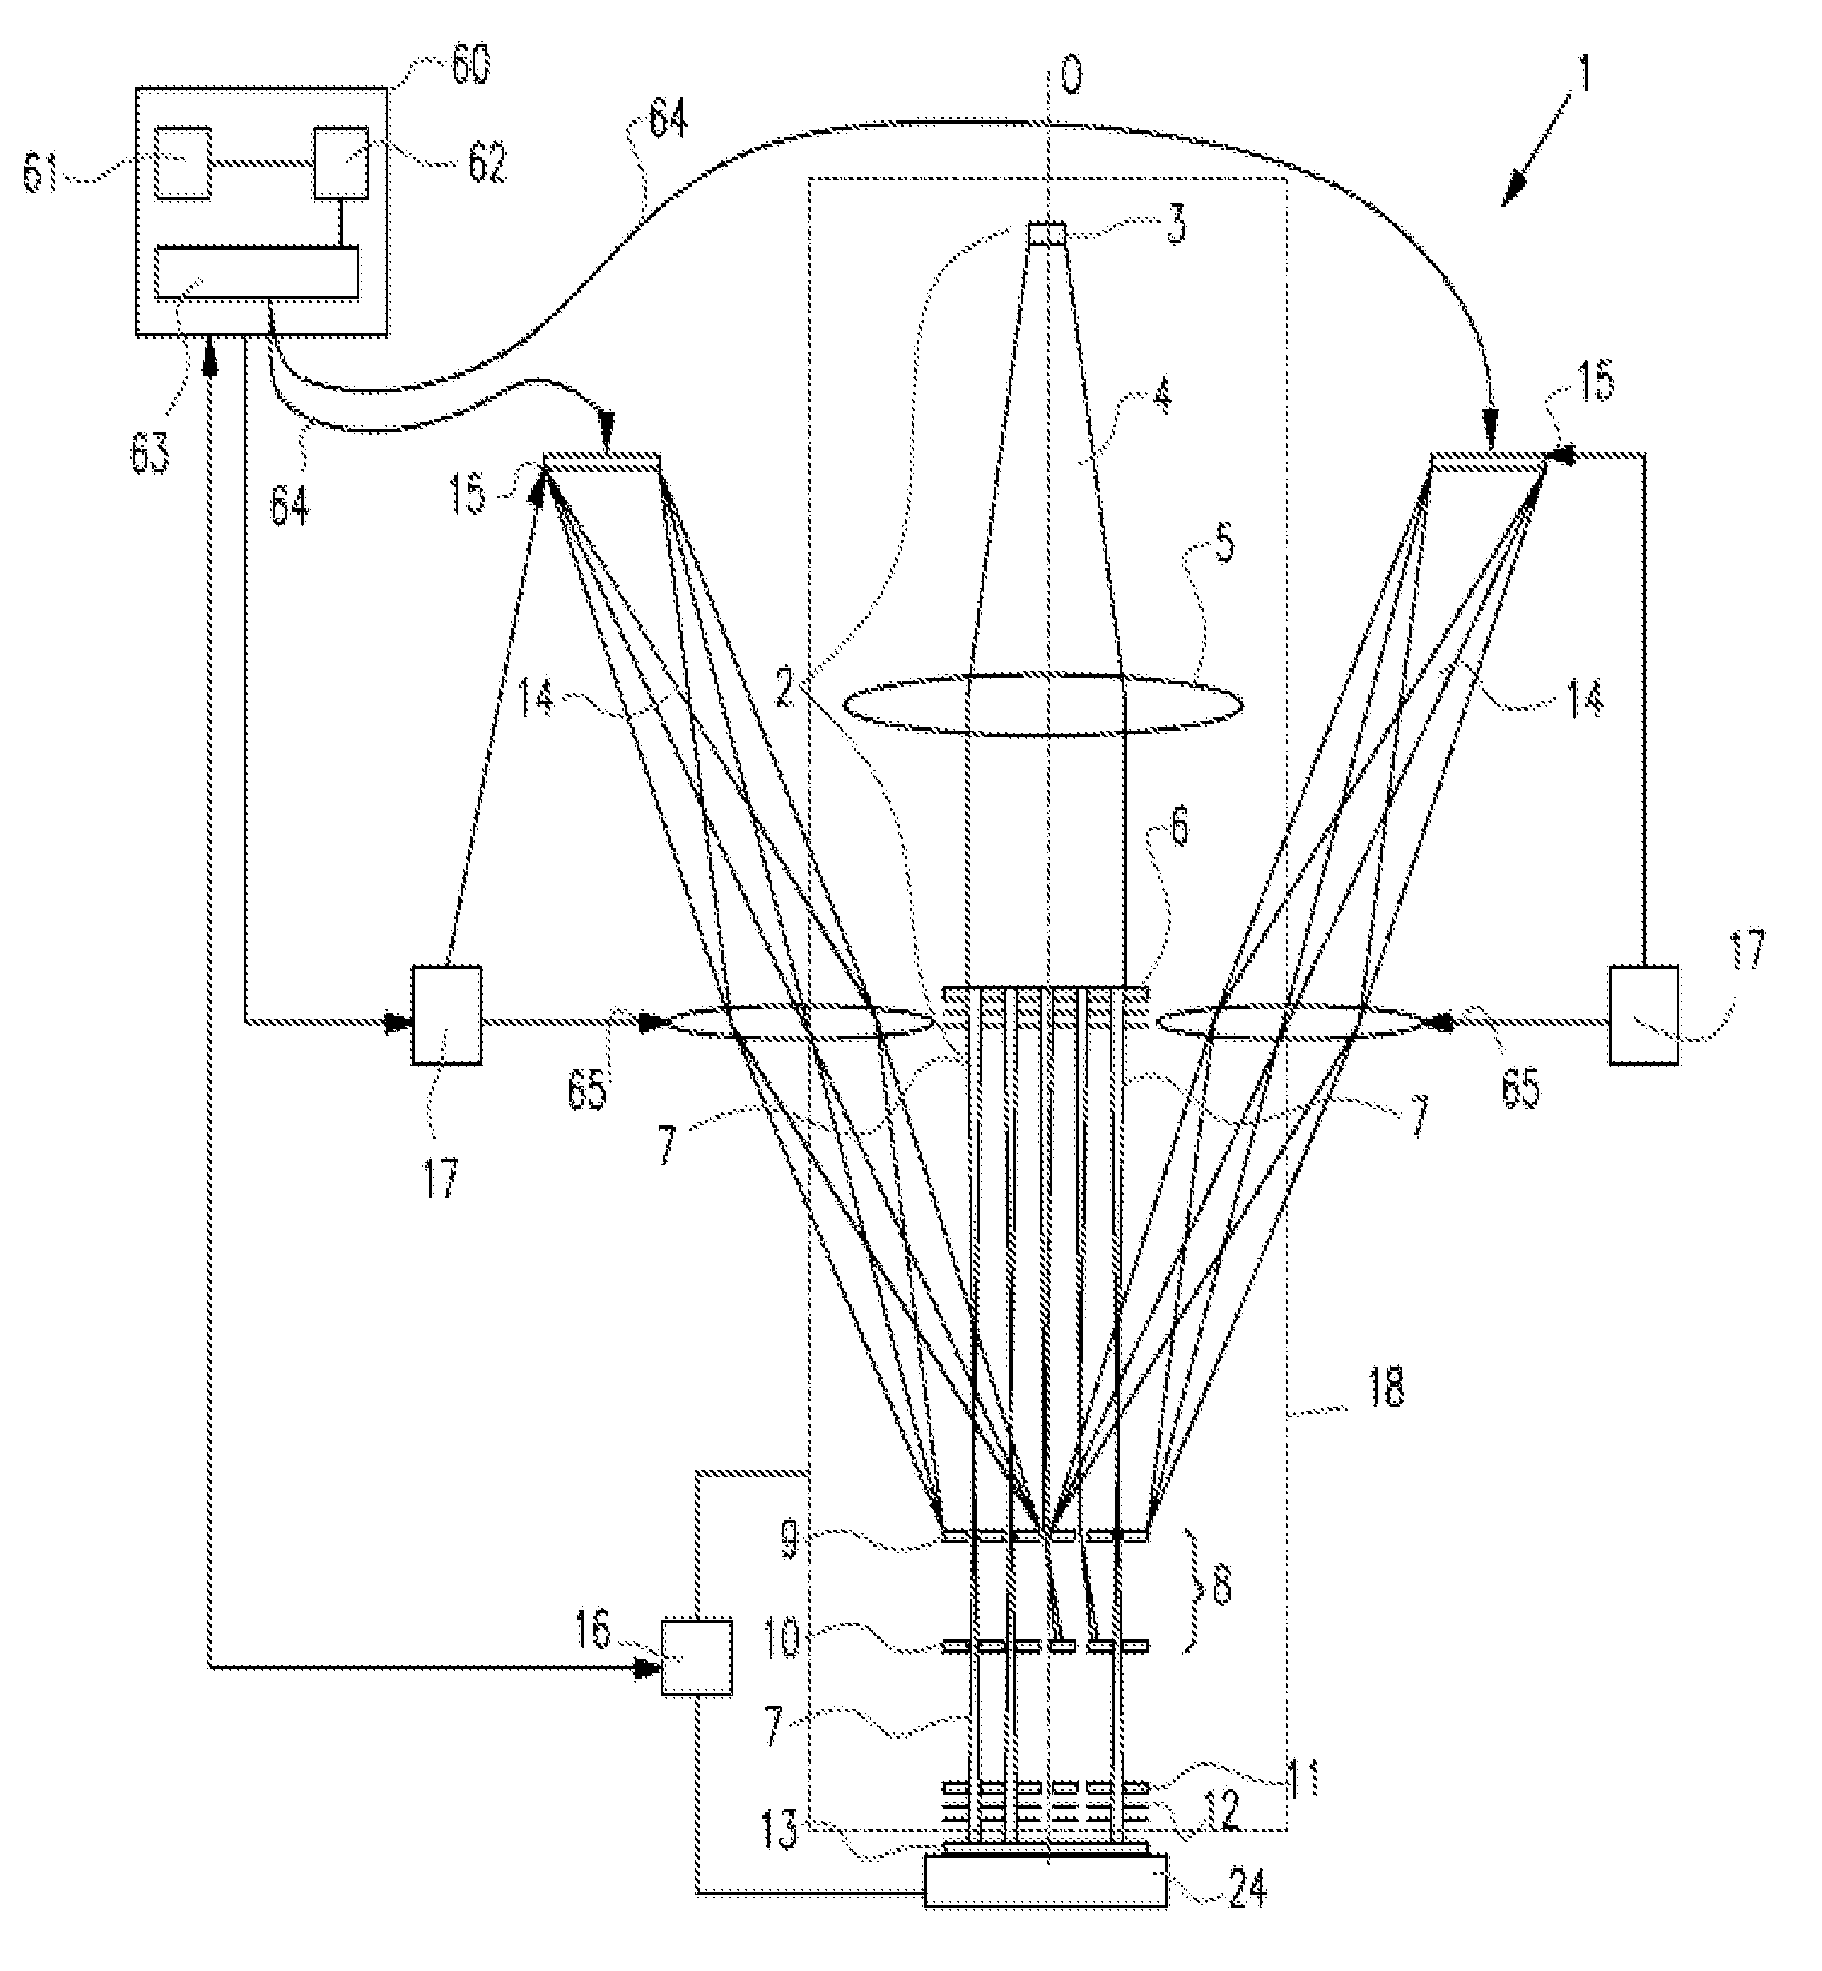 Charged particle optical system comprising an electrostatic deflector